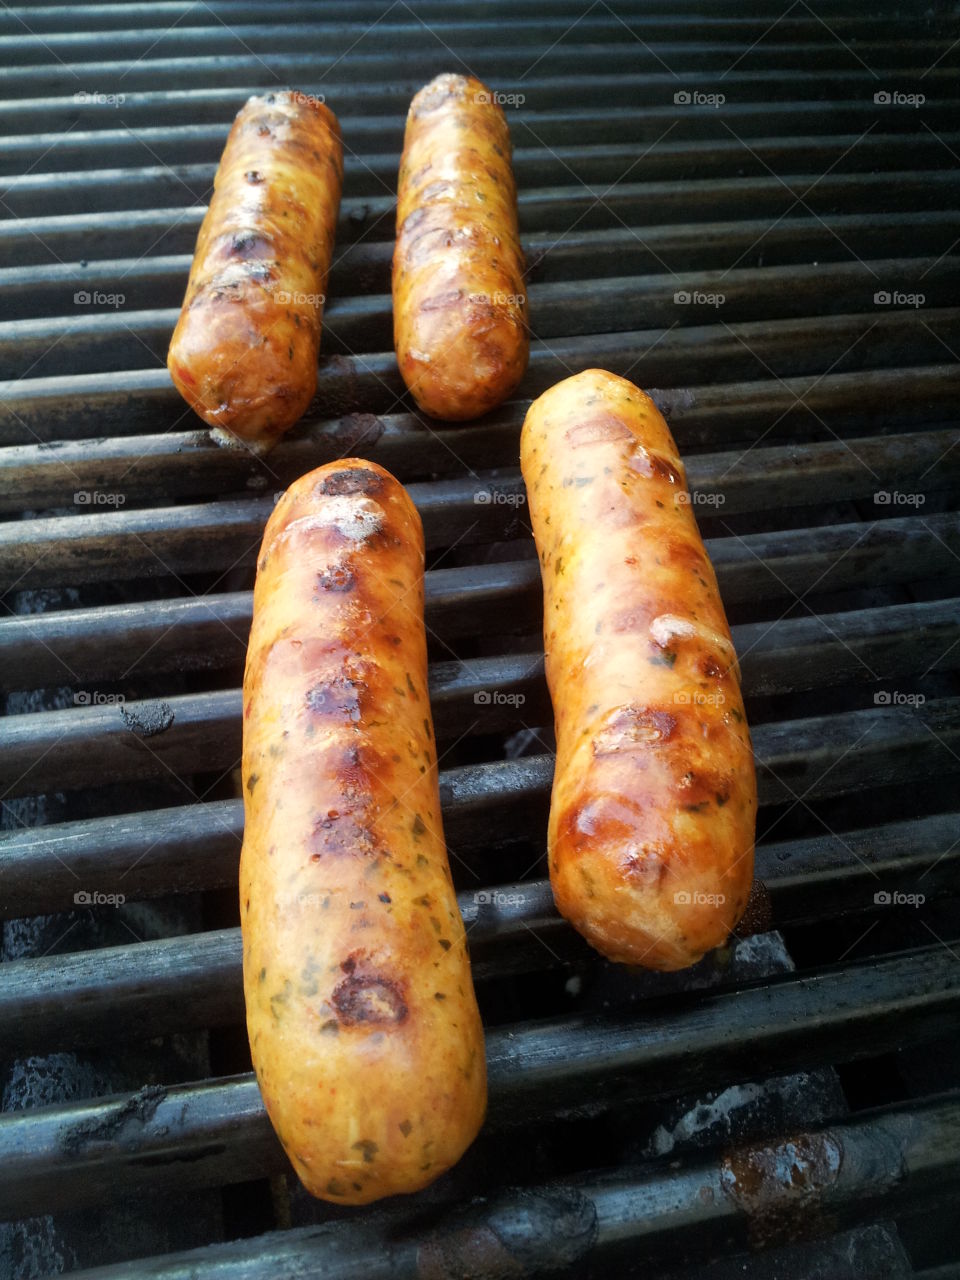 Brats cooking on the grill